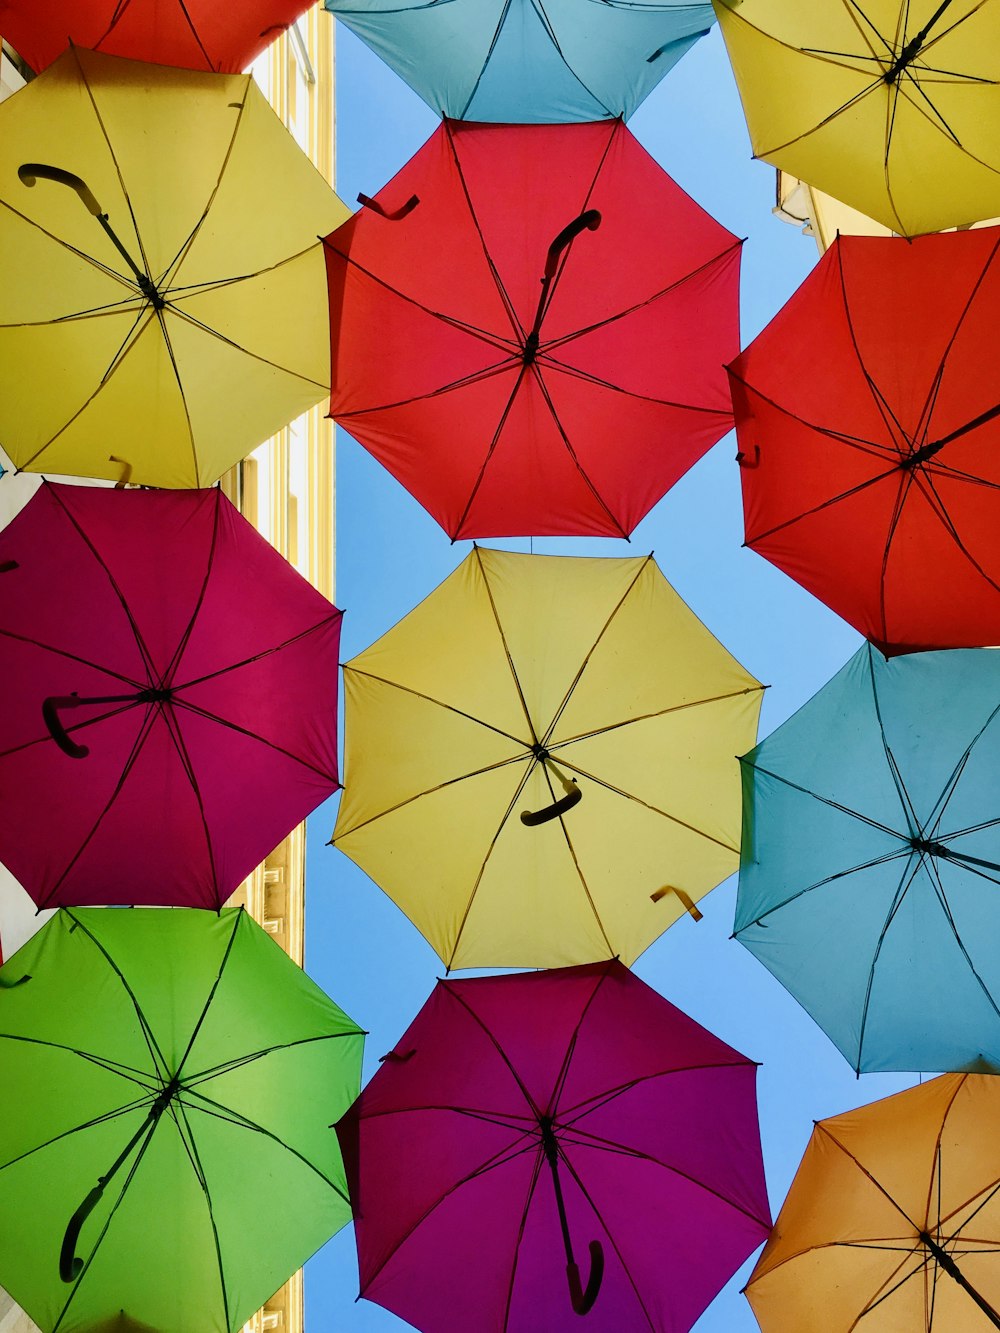 assorted-color umbrellas during daytime